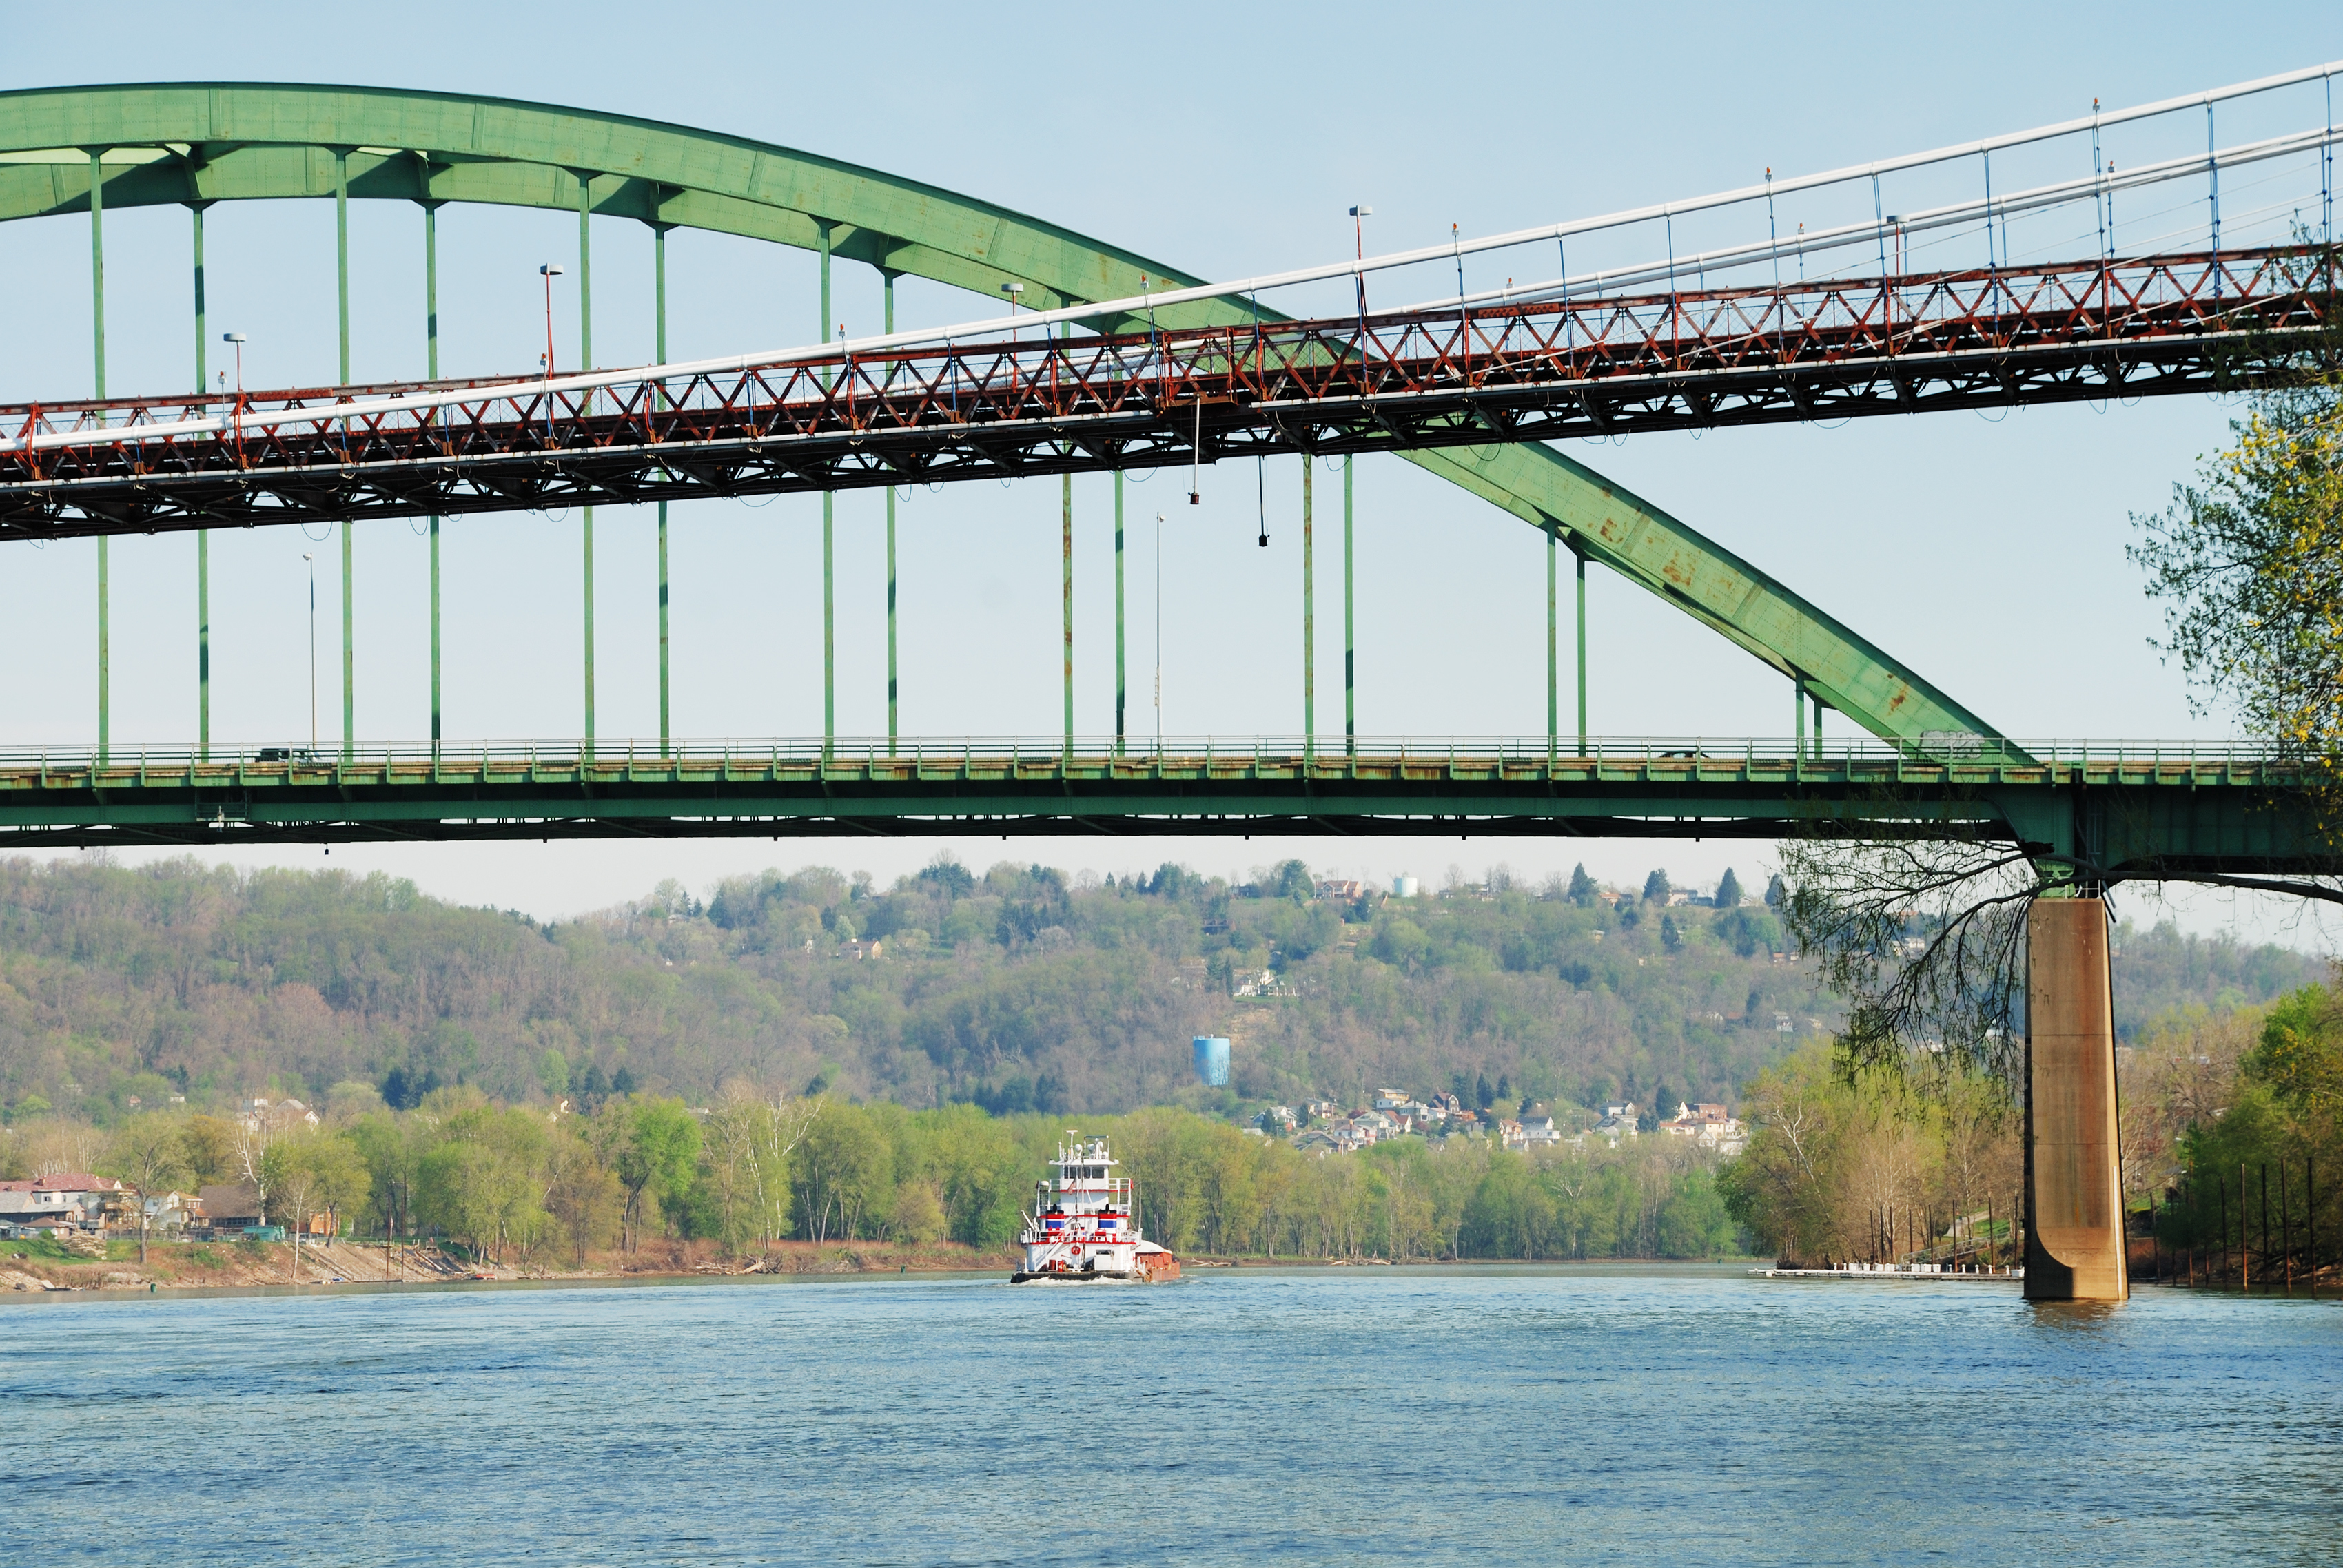 Bridges crisscross over the Ohio River as a barge pushes a load of cargo upstream in the distance